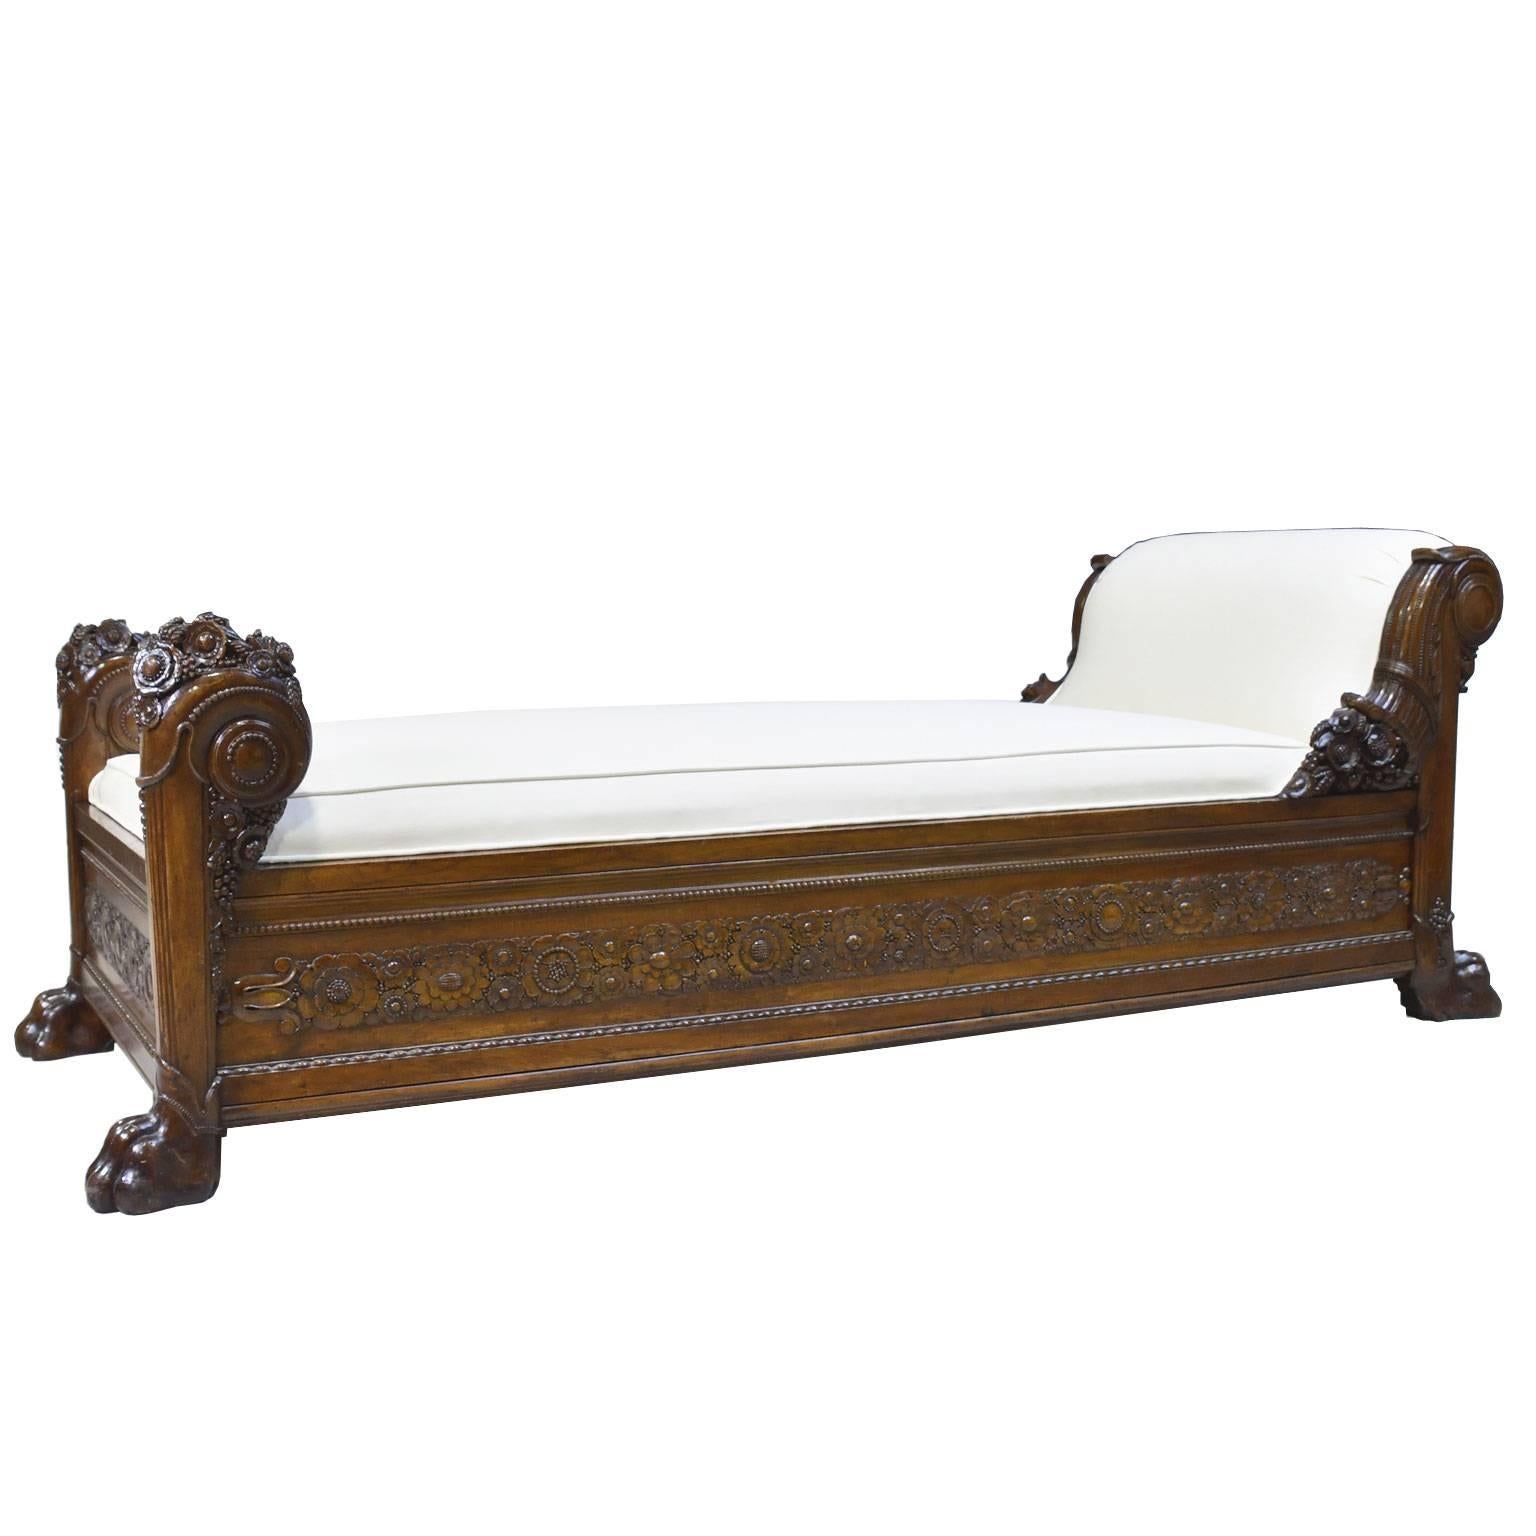 Hand-Carved Late 18th Century French Directoire Daybed in Carved Mahogany with Upholstery